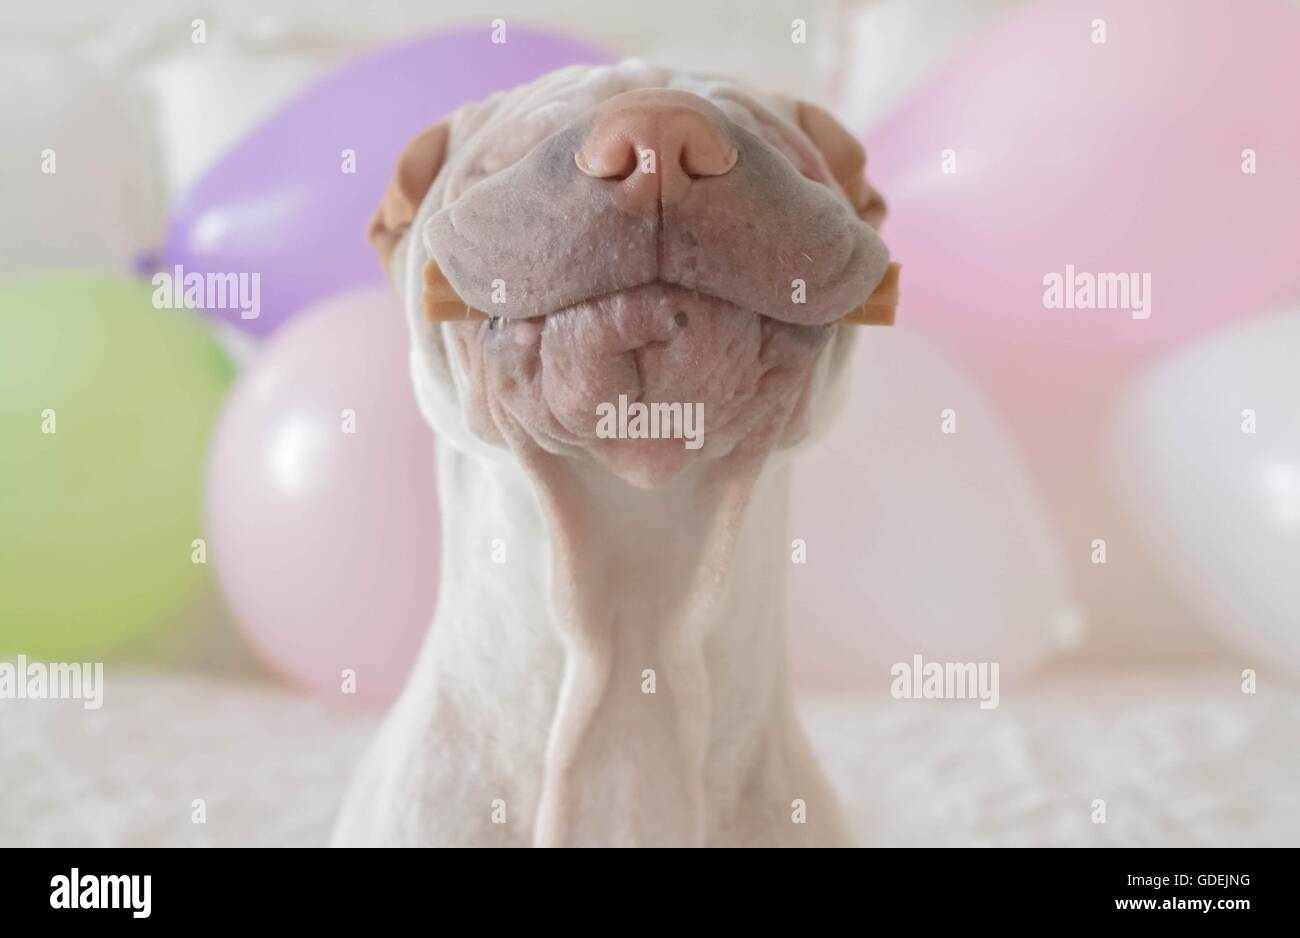 Shar pei dog with treat in his mouth surrounded by balloons Stock Photo